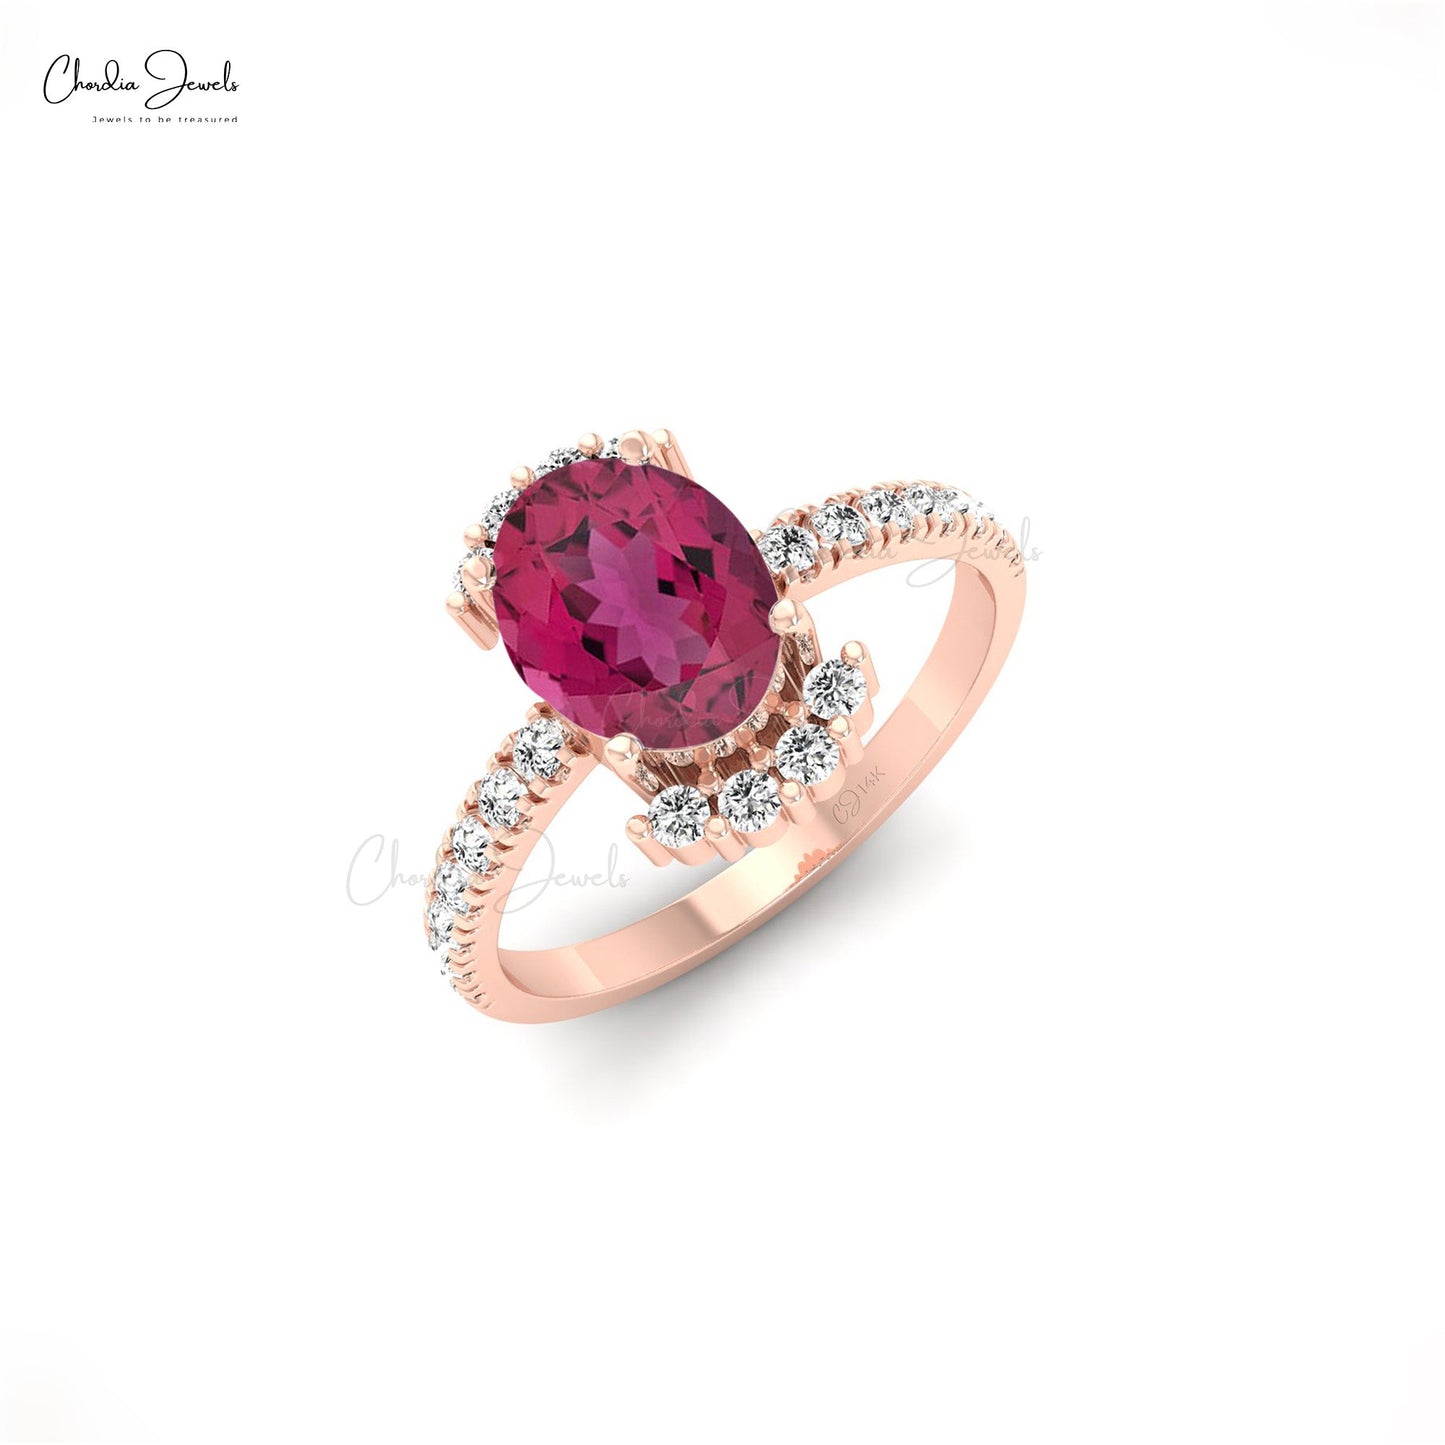 Load image into Gallery viewer, Oval Shaped Solitaire Pink Tourmaline Diamond Half Halo Engagement Ring
